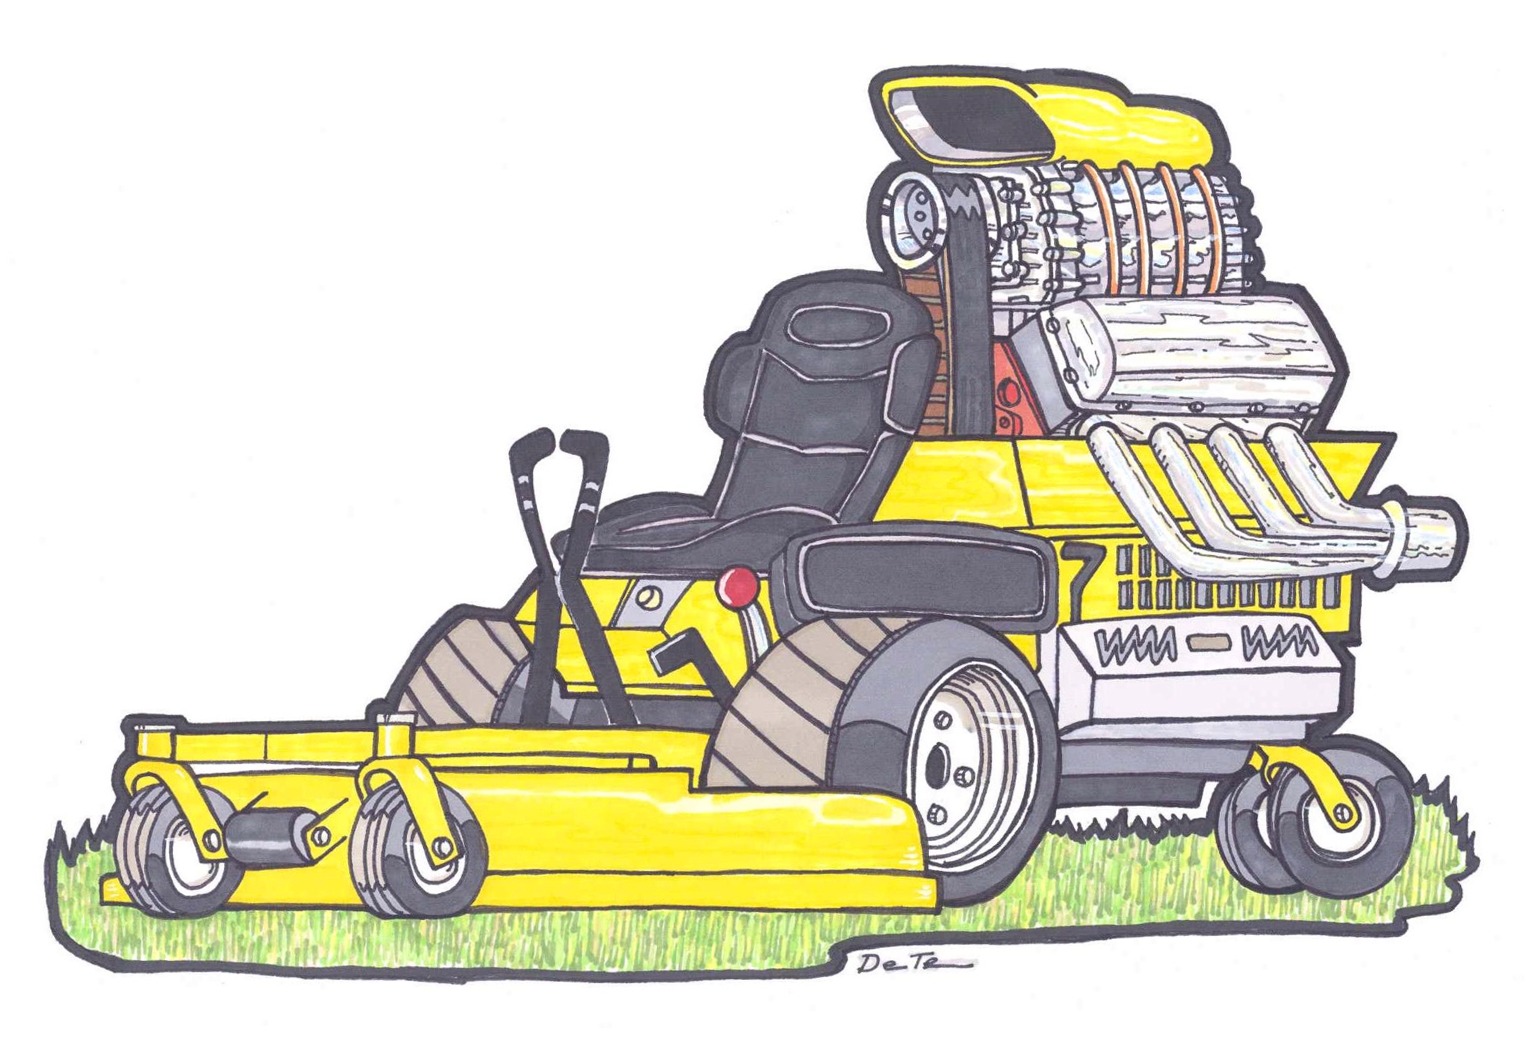 ... Cartoon Lawn Care Galleries related: lawn mower Cartoon Lawn Care Clipart ...